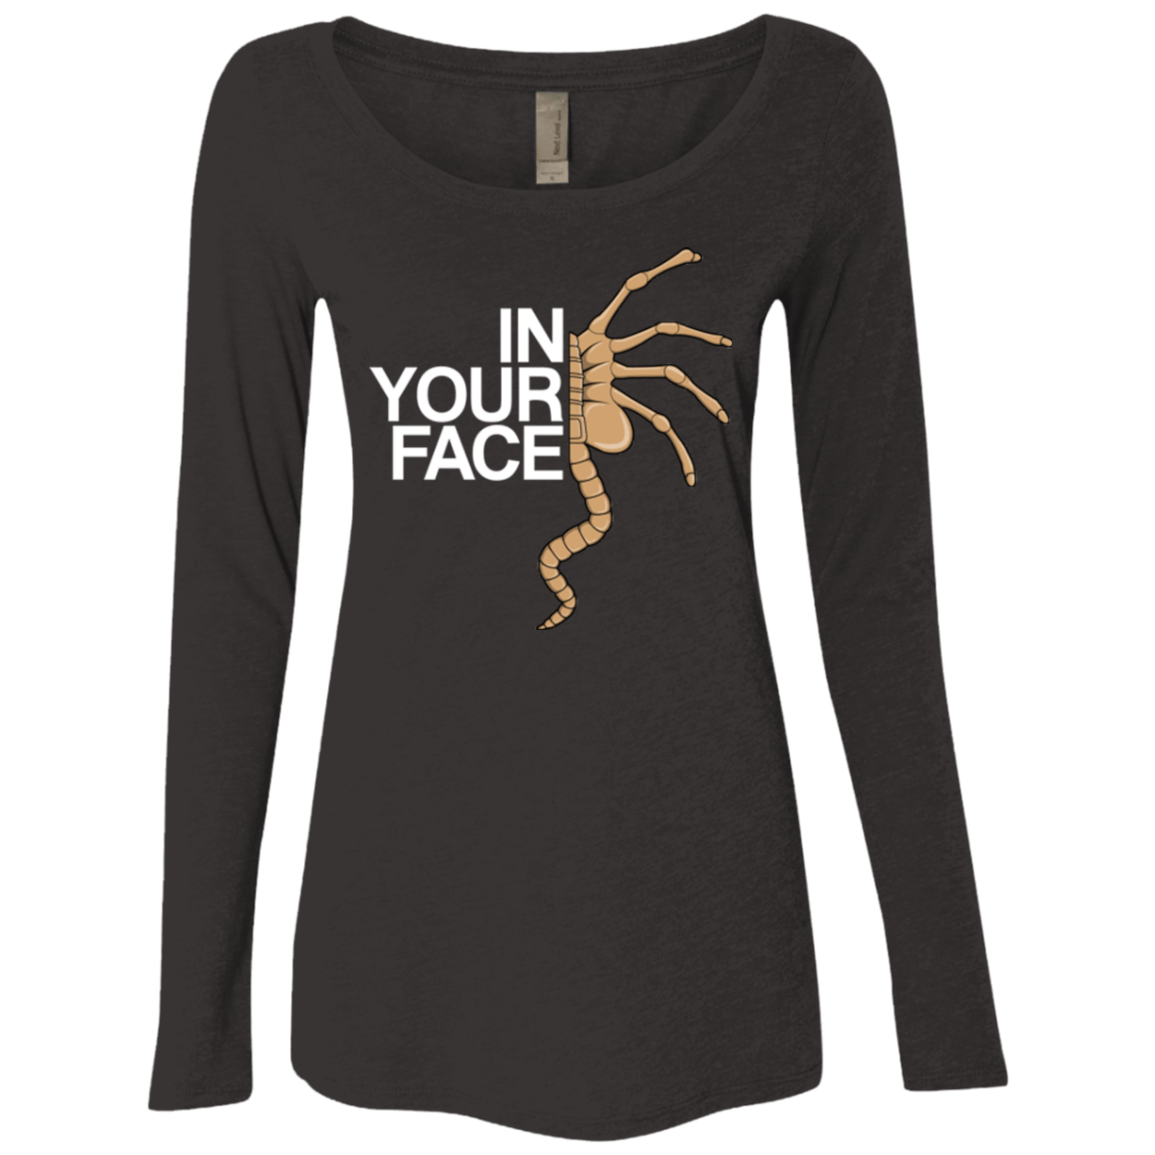 IN YOUR FACE Women's Triblend Long Sleeve Shirt